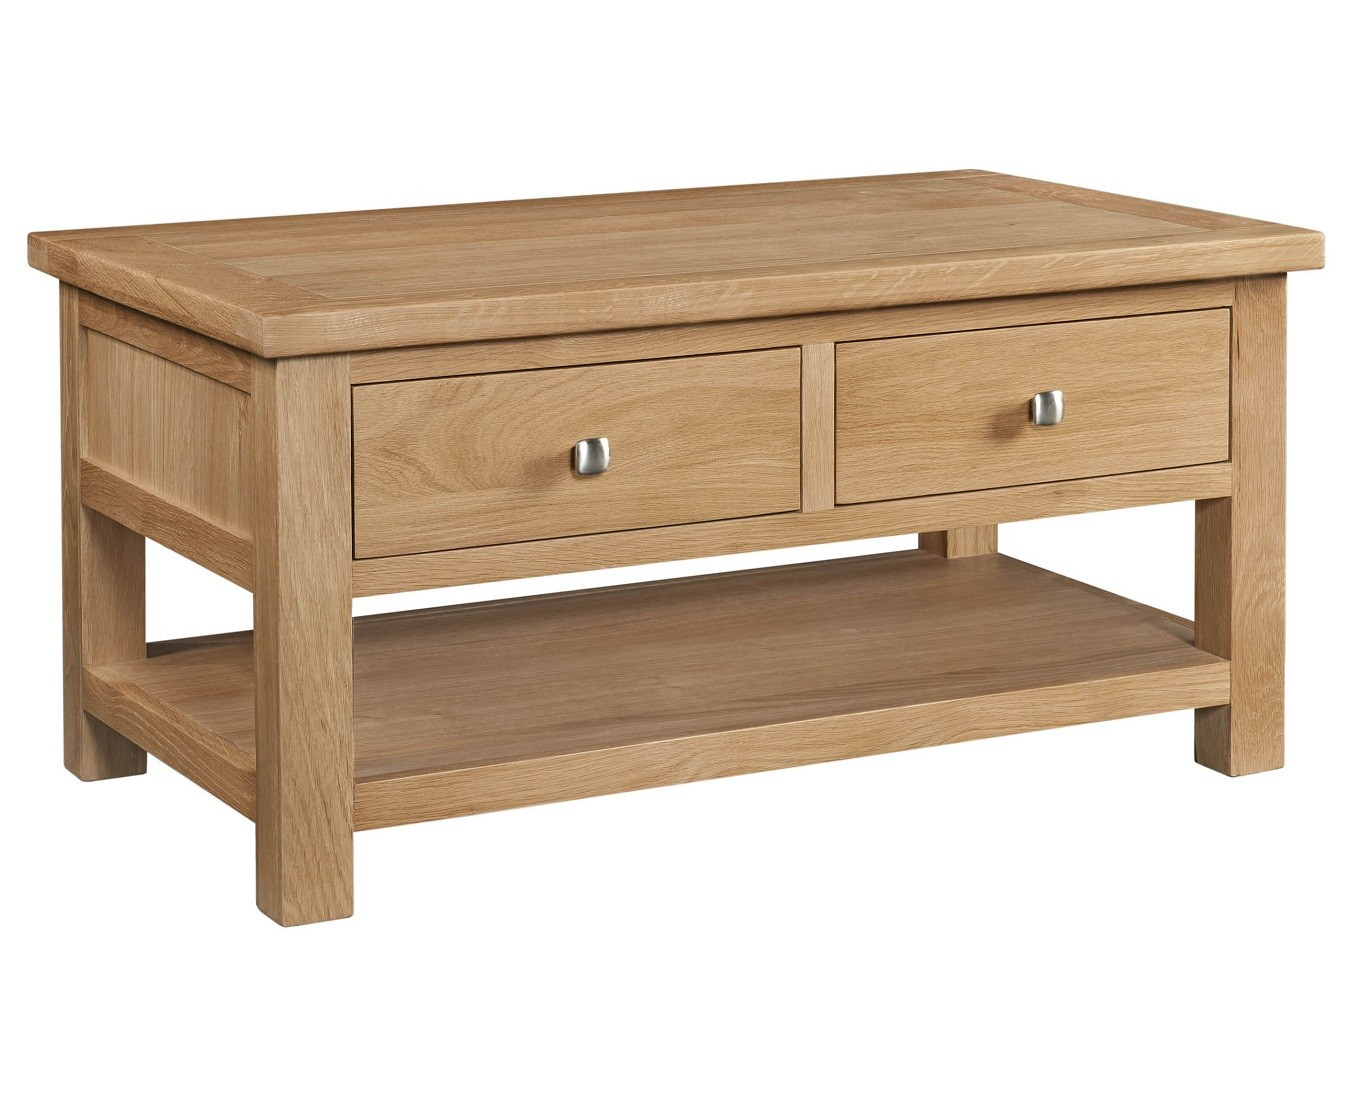 Grasmere Light Oak Coffee Table With Drawers Oak Furniture Uk for dimensions 1360 X 1100